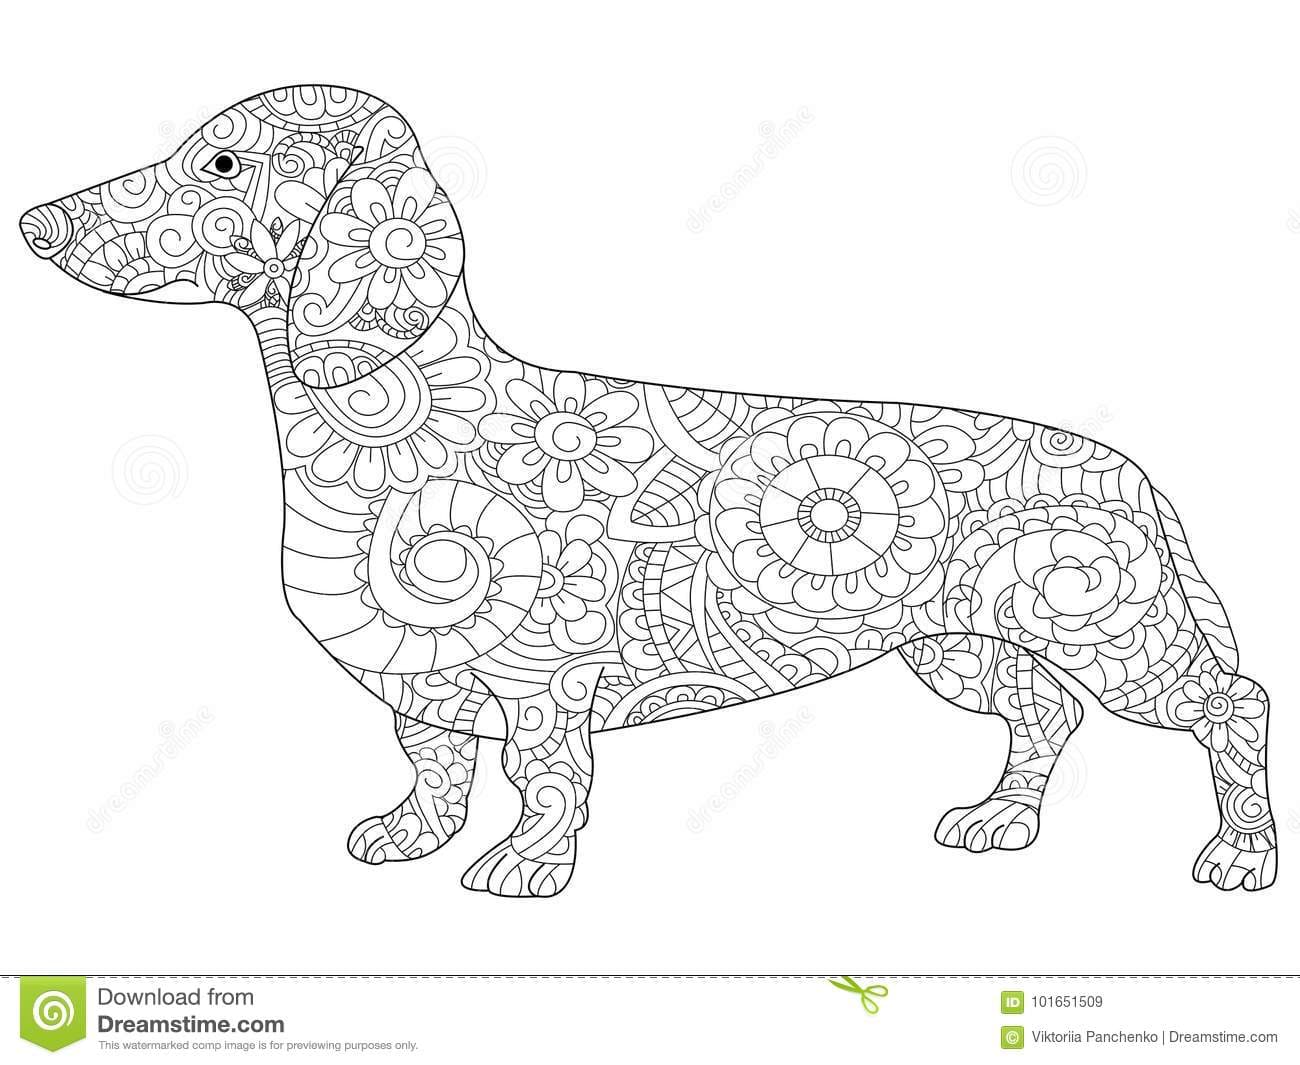 Dachshund Coloring Book For Adults Raster